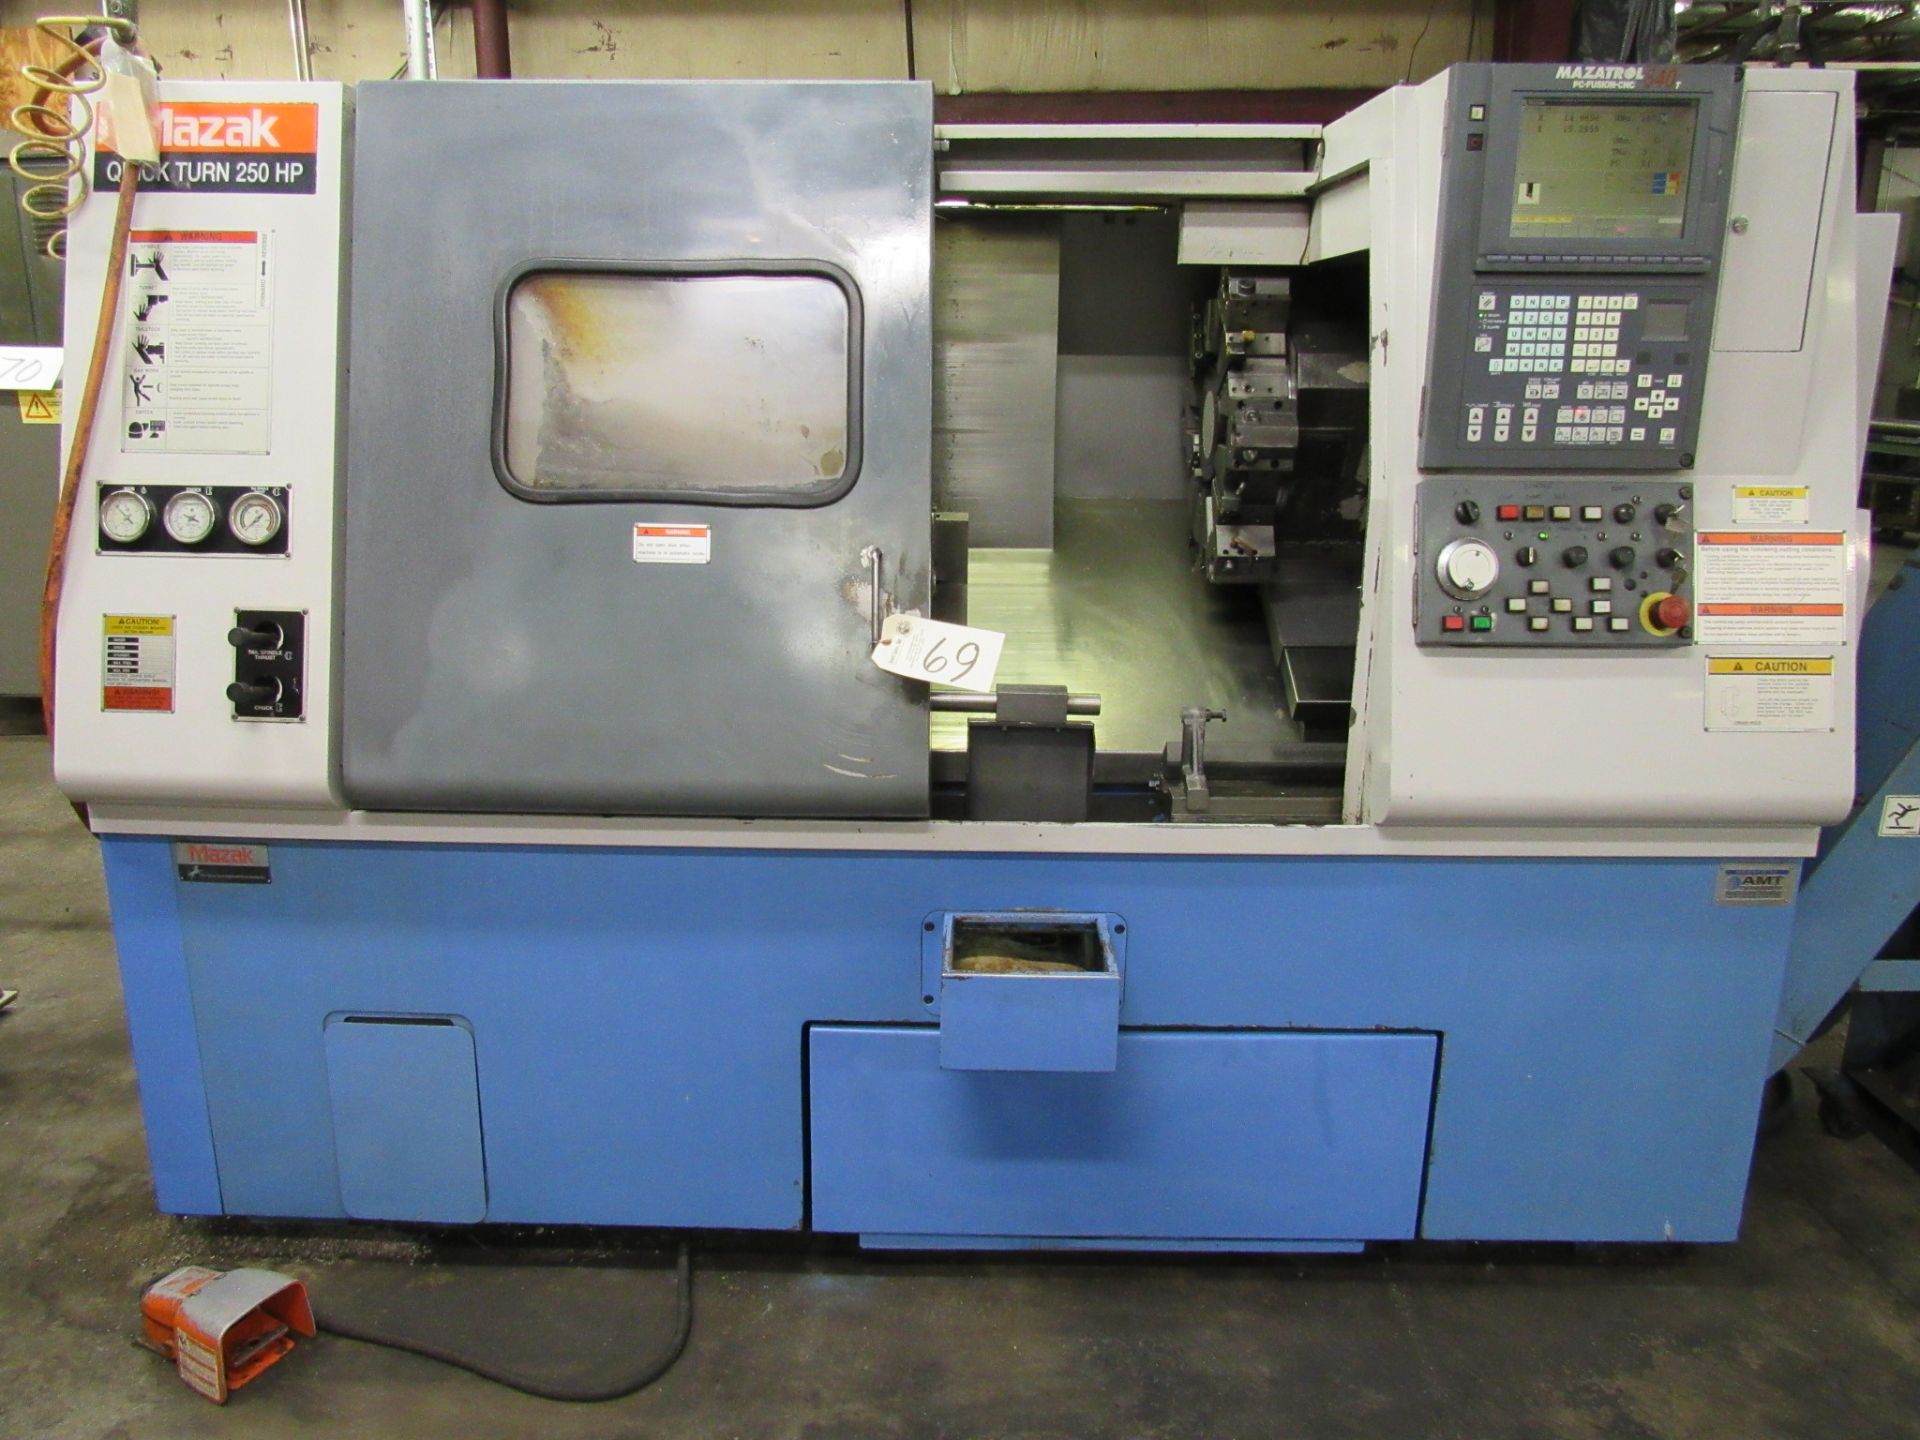 Mazak QT250 HP CNC Turning Center with 10'' 3-Jaw Power Chuck, Approx 30'' to Tailstock, 12 Position - Image 2 of 3